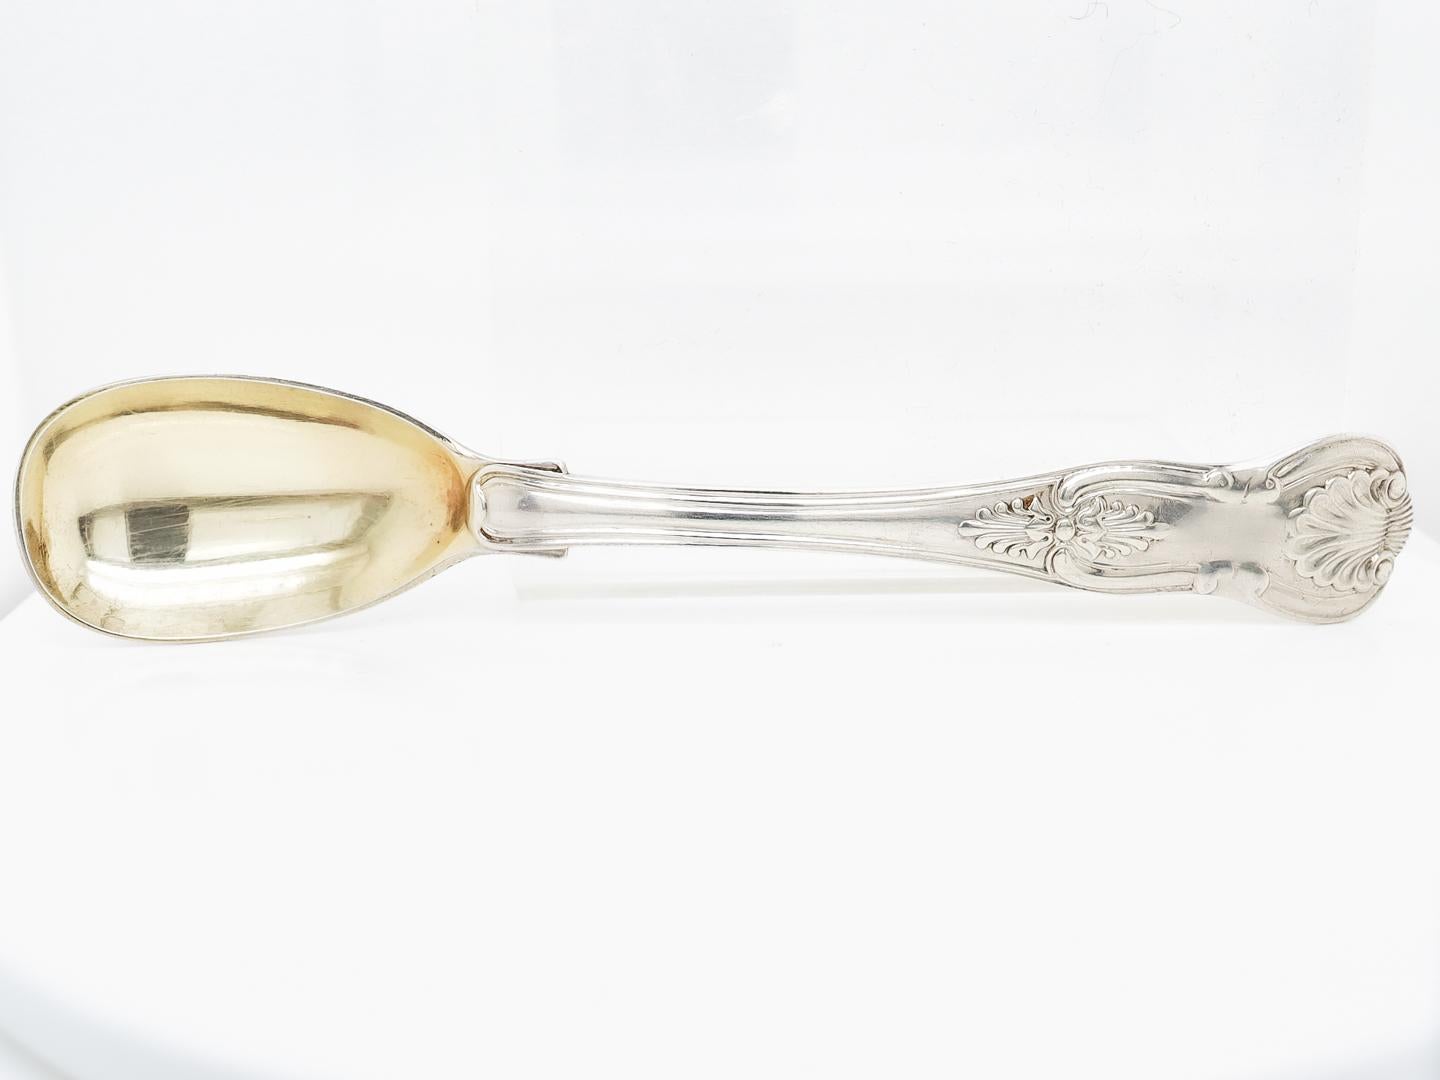 Early 19th Century Antique English Sterling Silver Kings Mustard Spoon by William Chawner II For Sale